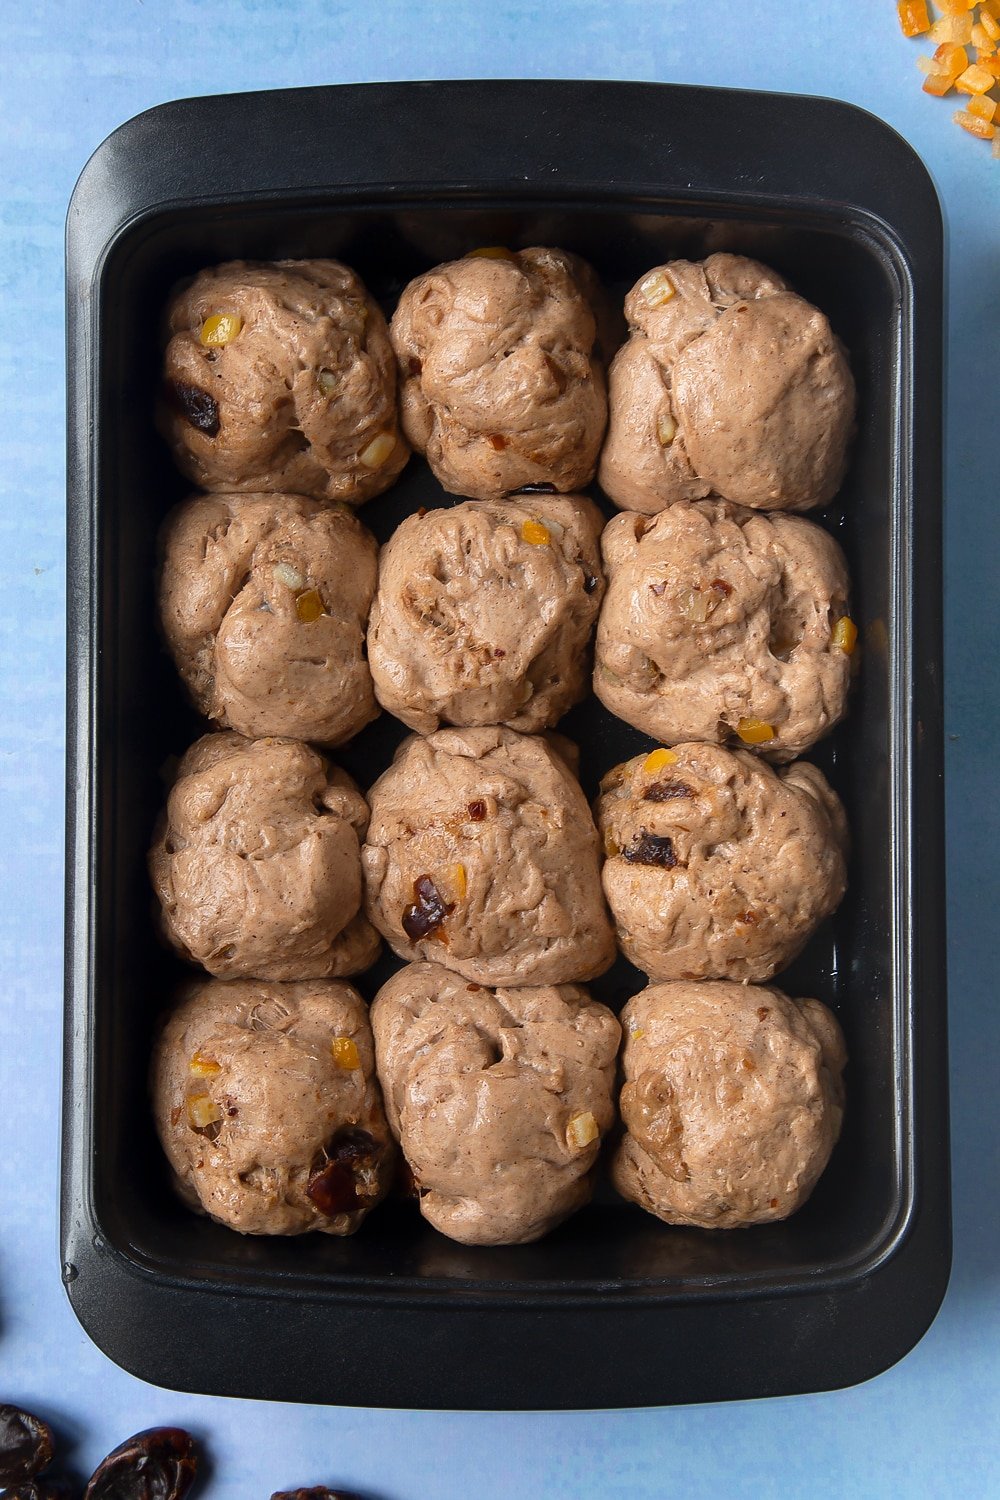 Vegan hot cross buns dough with mixed peel and chopped dates, divided into 12 balls and proved in an oiled tray.